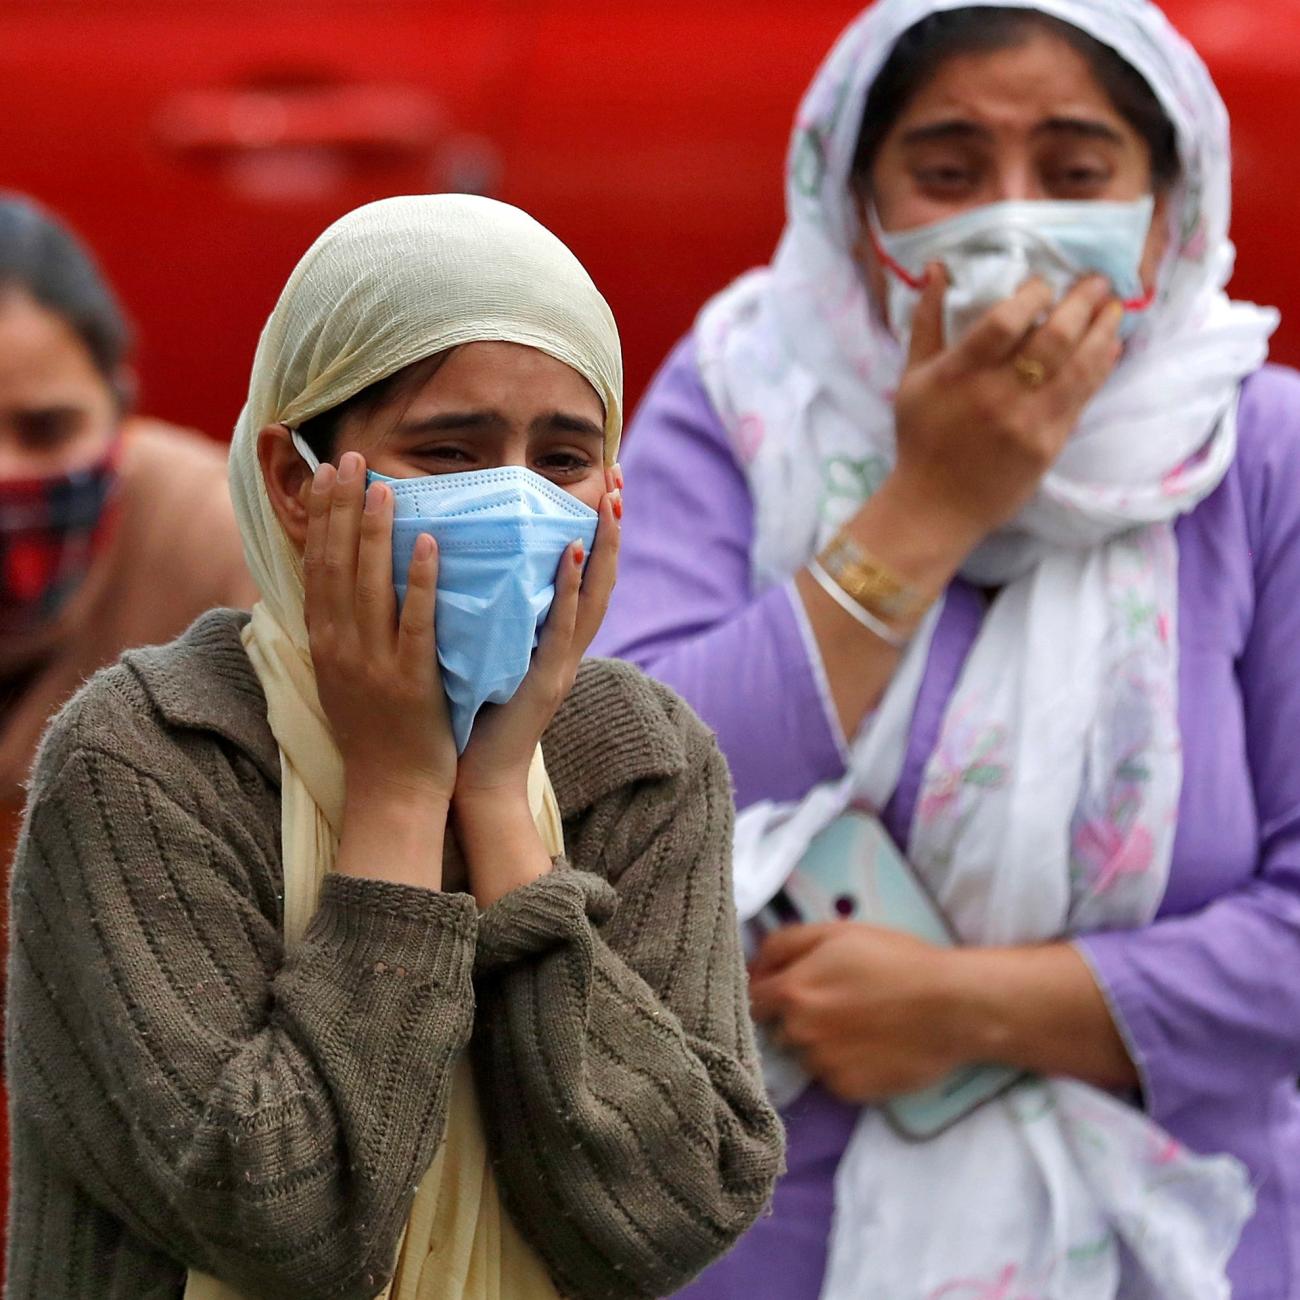 Relatives of a man who died from the coronavirus disease (COVID-19) mourn during his cremation at a crematorium ground in Srinagar May 25, 2021.